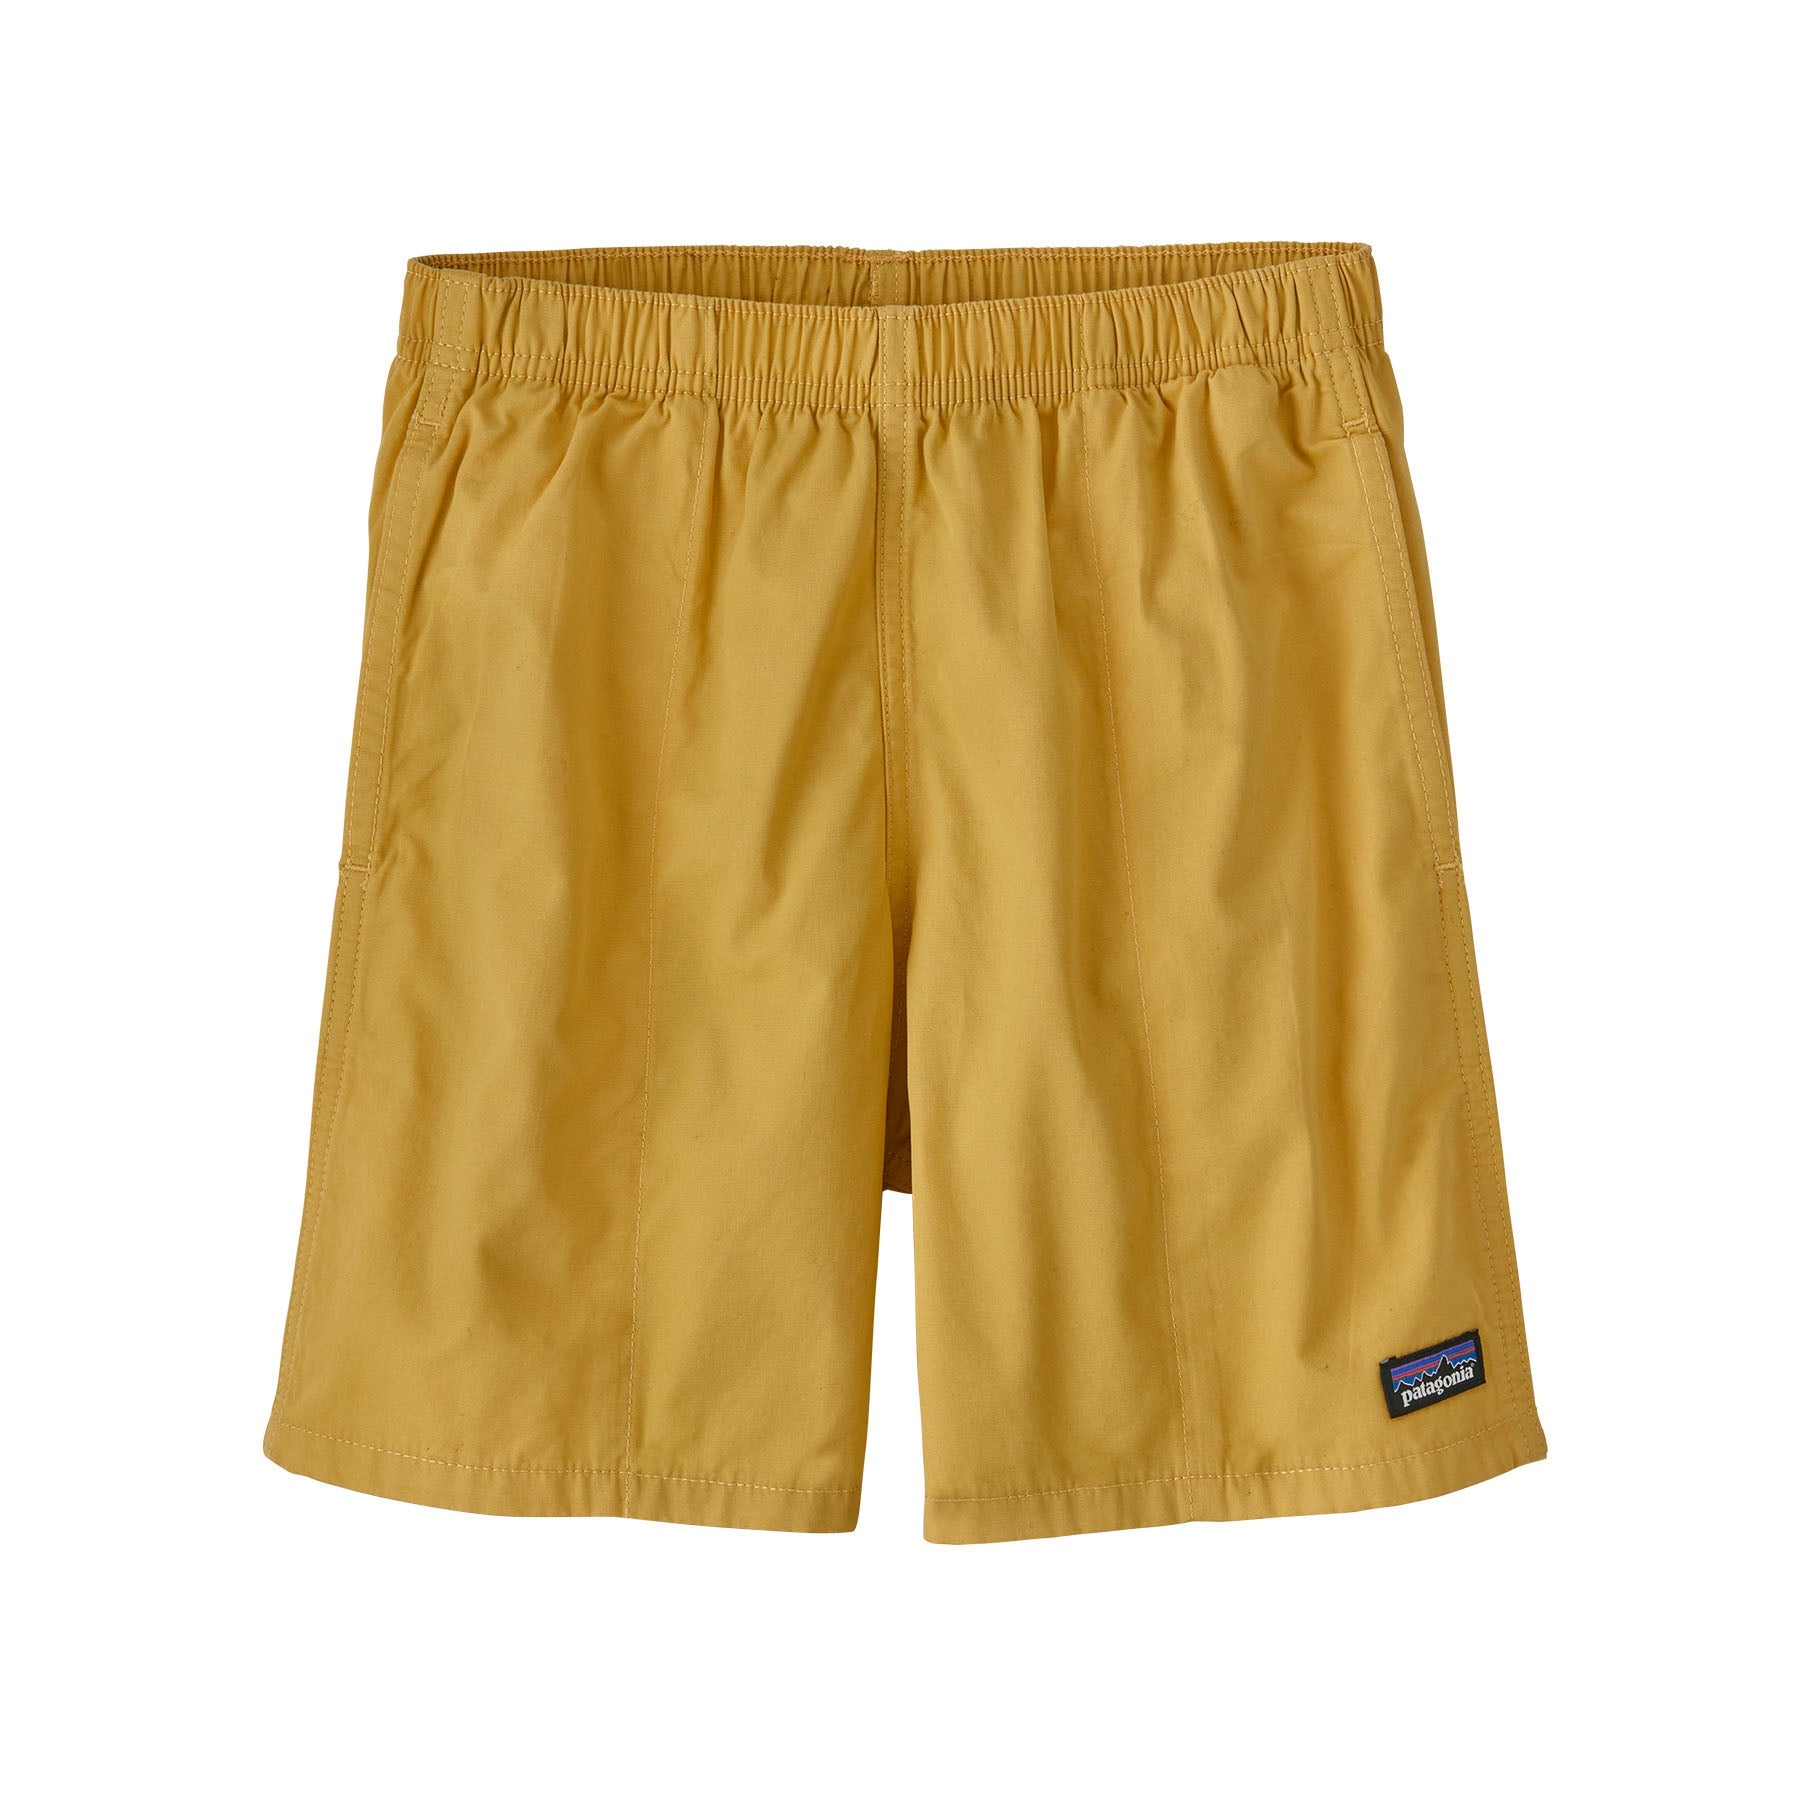 Patagonia Kids Funhoggers Short: Surfboard Yellow Front View